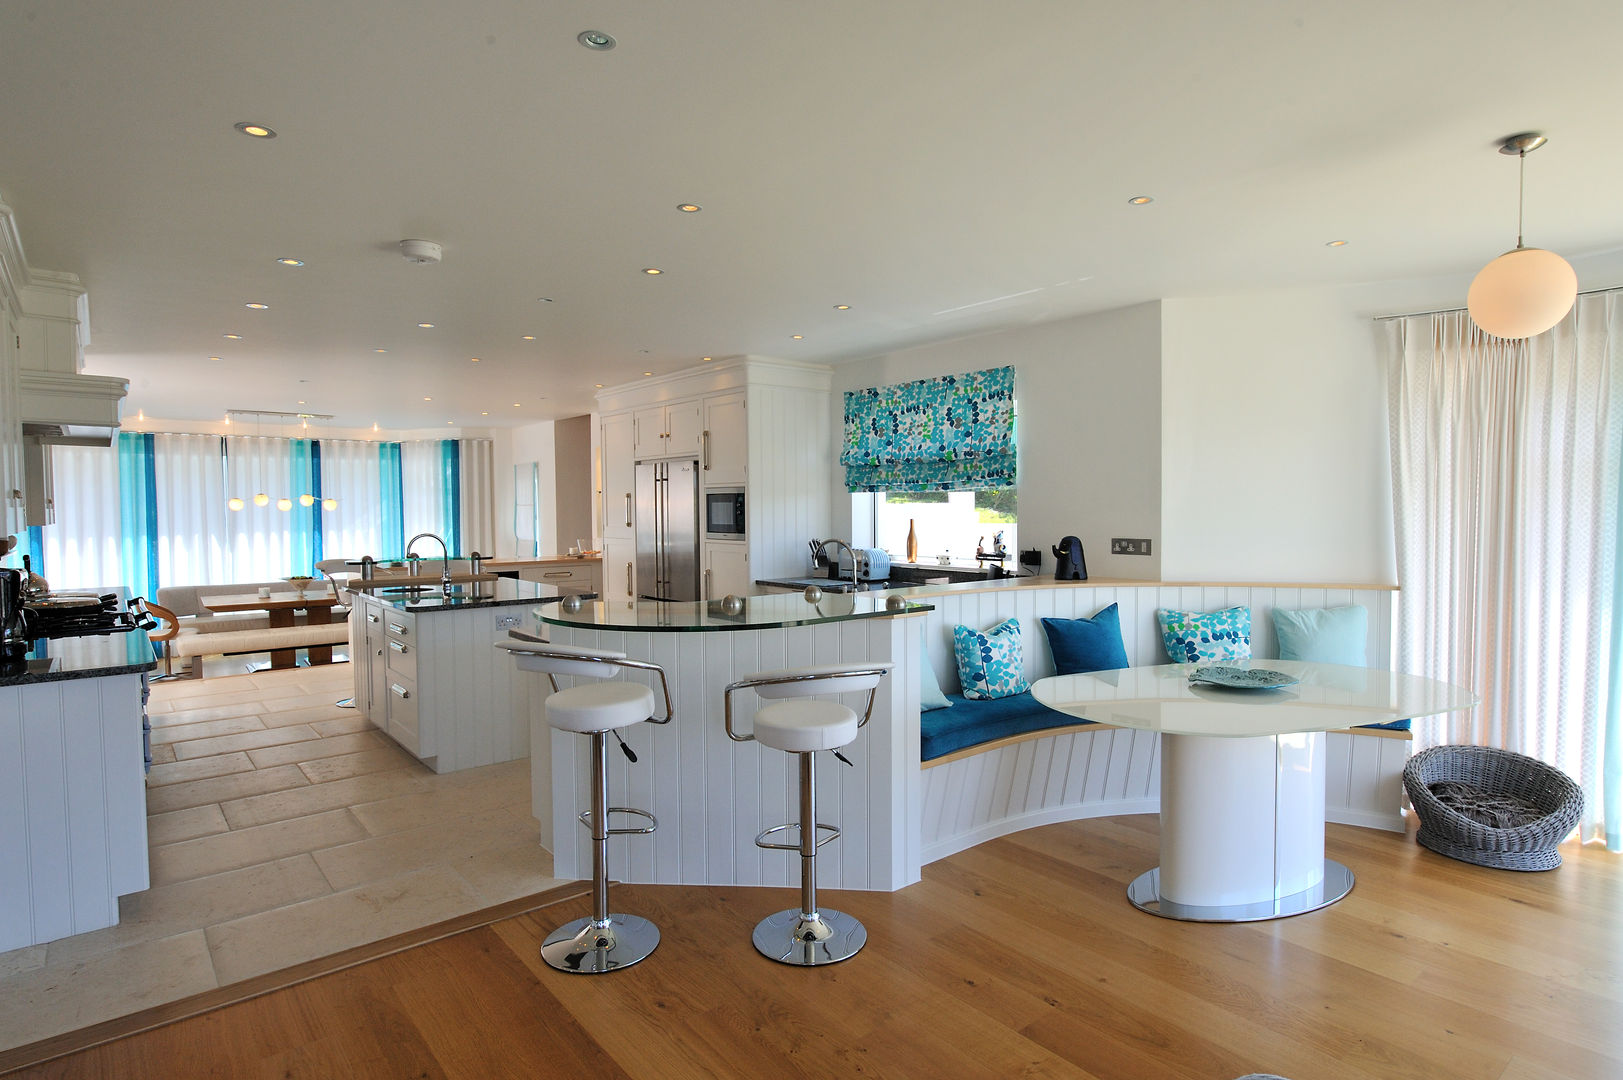 Sea House, Porth | Cornwall, Perfect Stays Perfect Stays Salas de jantar ecléticas dining room,bar stools,kitchen,beach house,wooden flooring,interior,holiday home